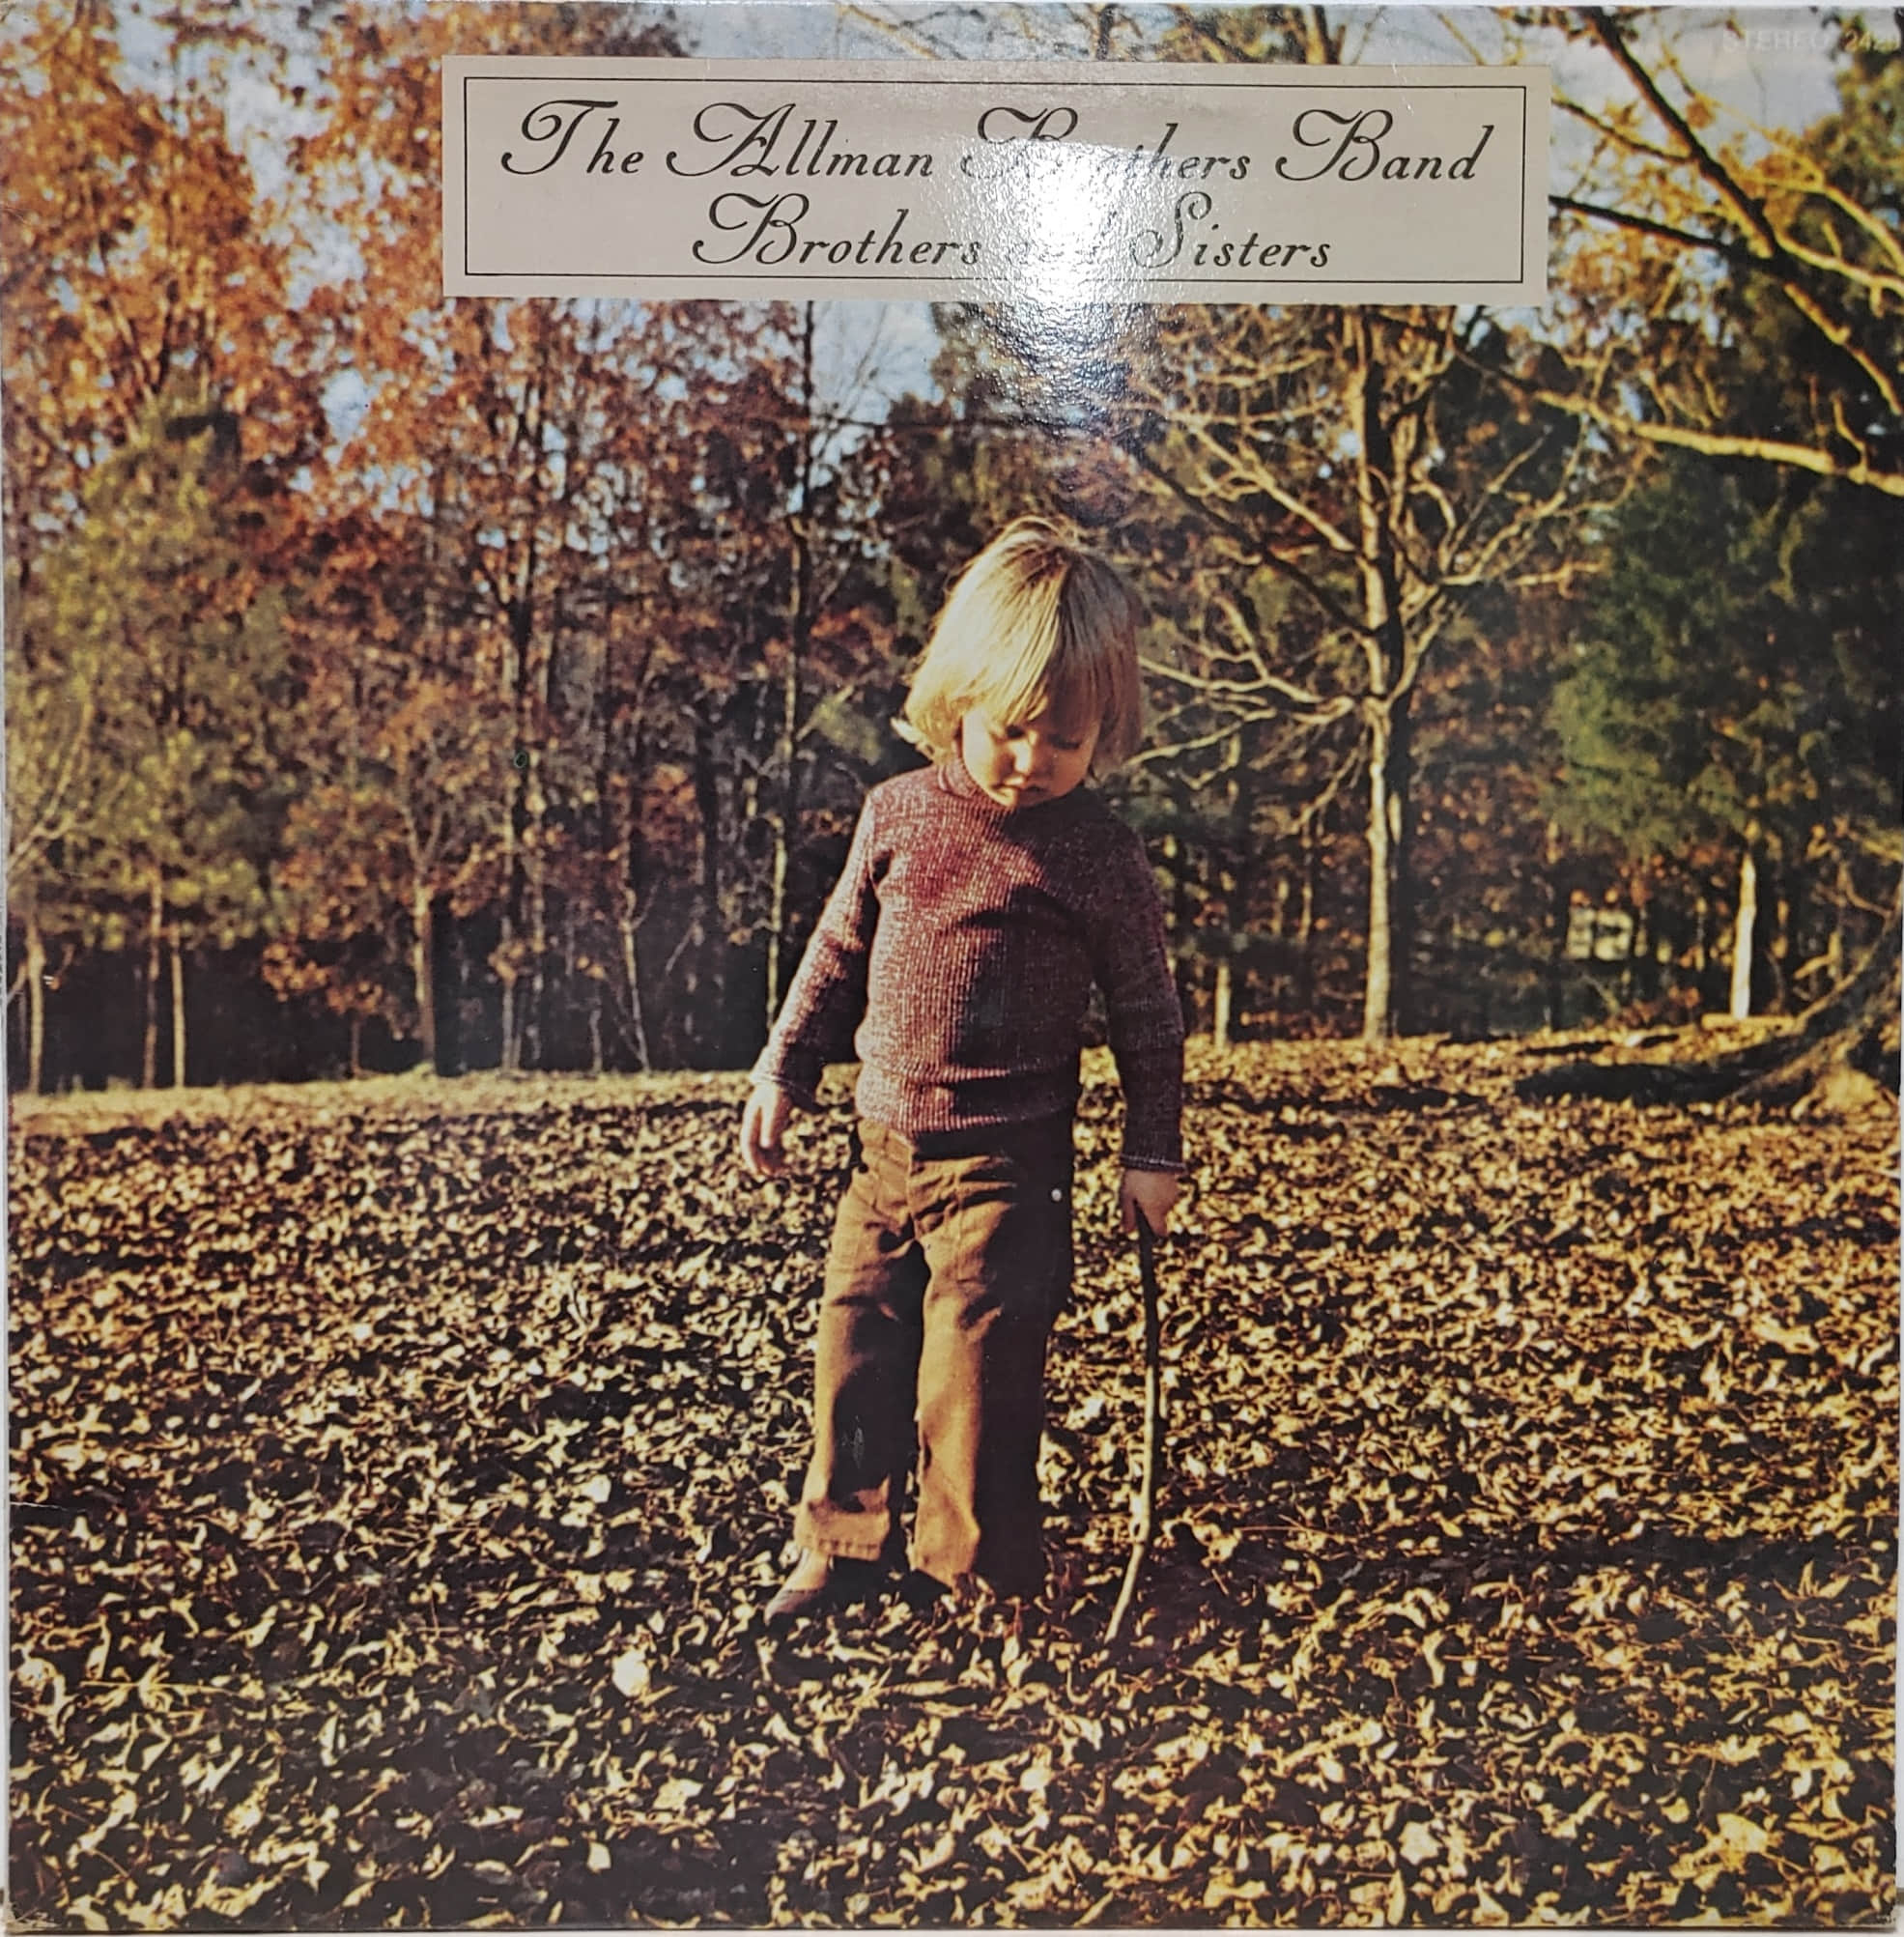 THE ALLMAN BROTHERS BAND / BROTHER AND SISTERS